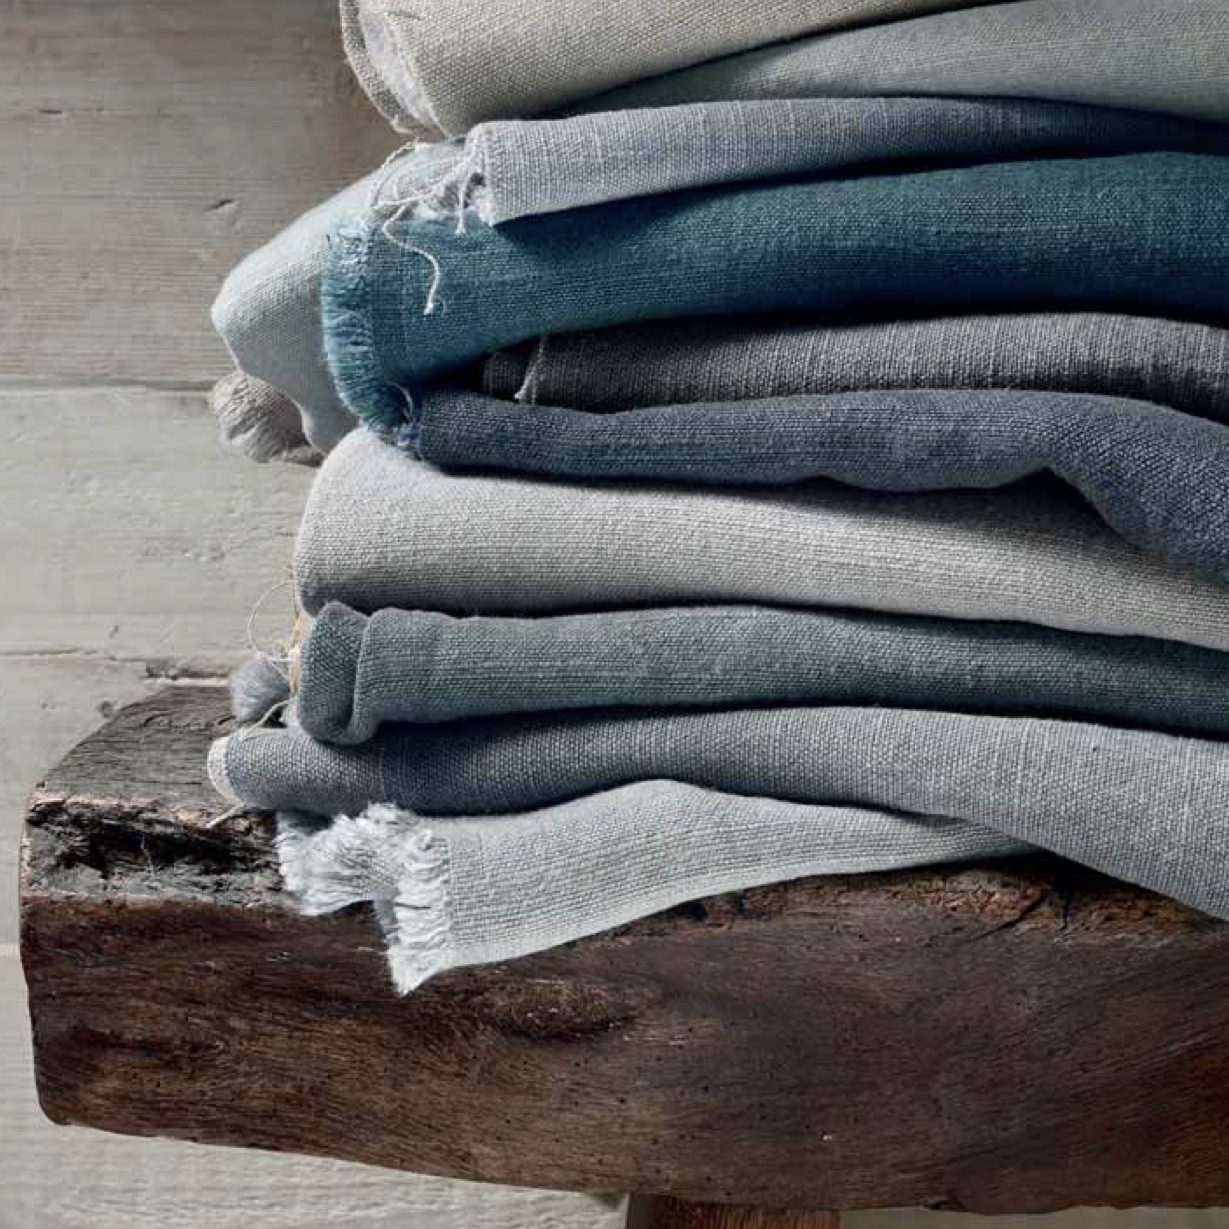 Stack of fine linen cloth samples in various shades of blue and natural